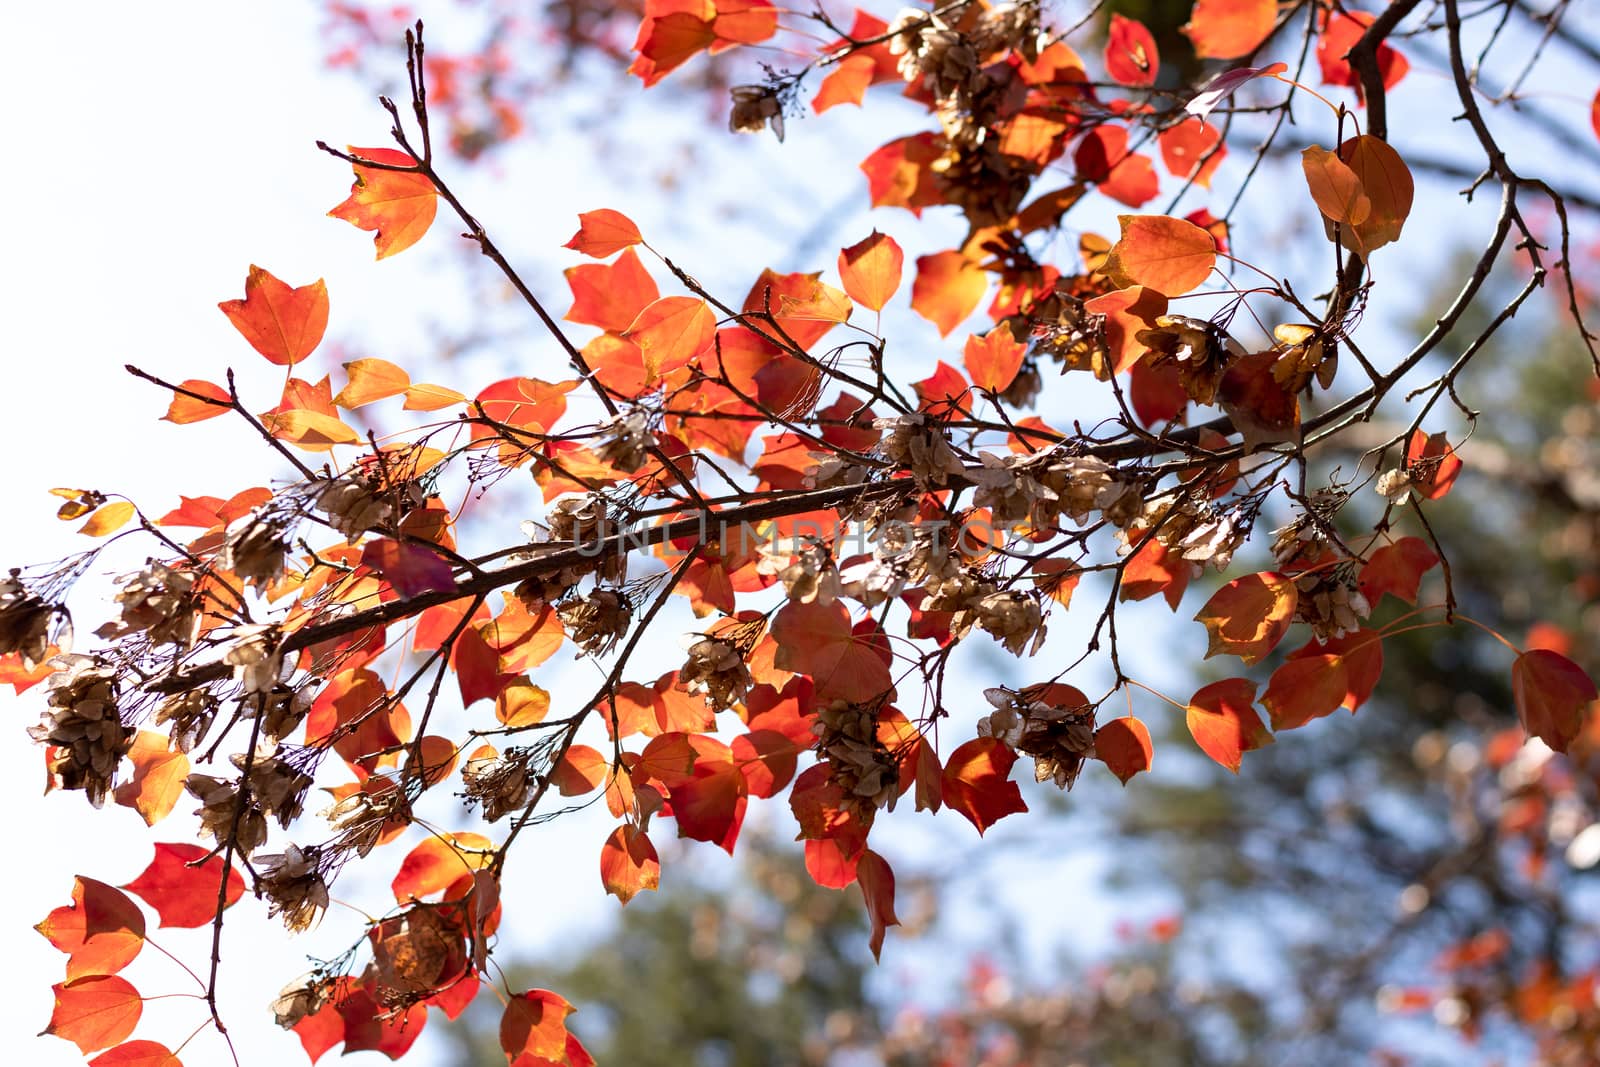 Red autumn leaves and dried flowers by phathisile